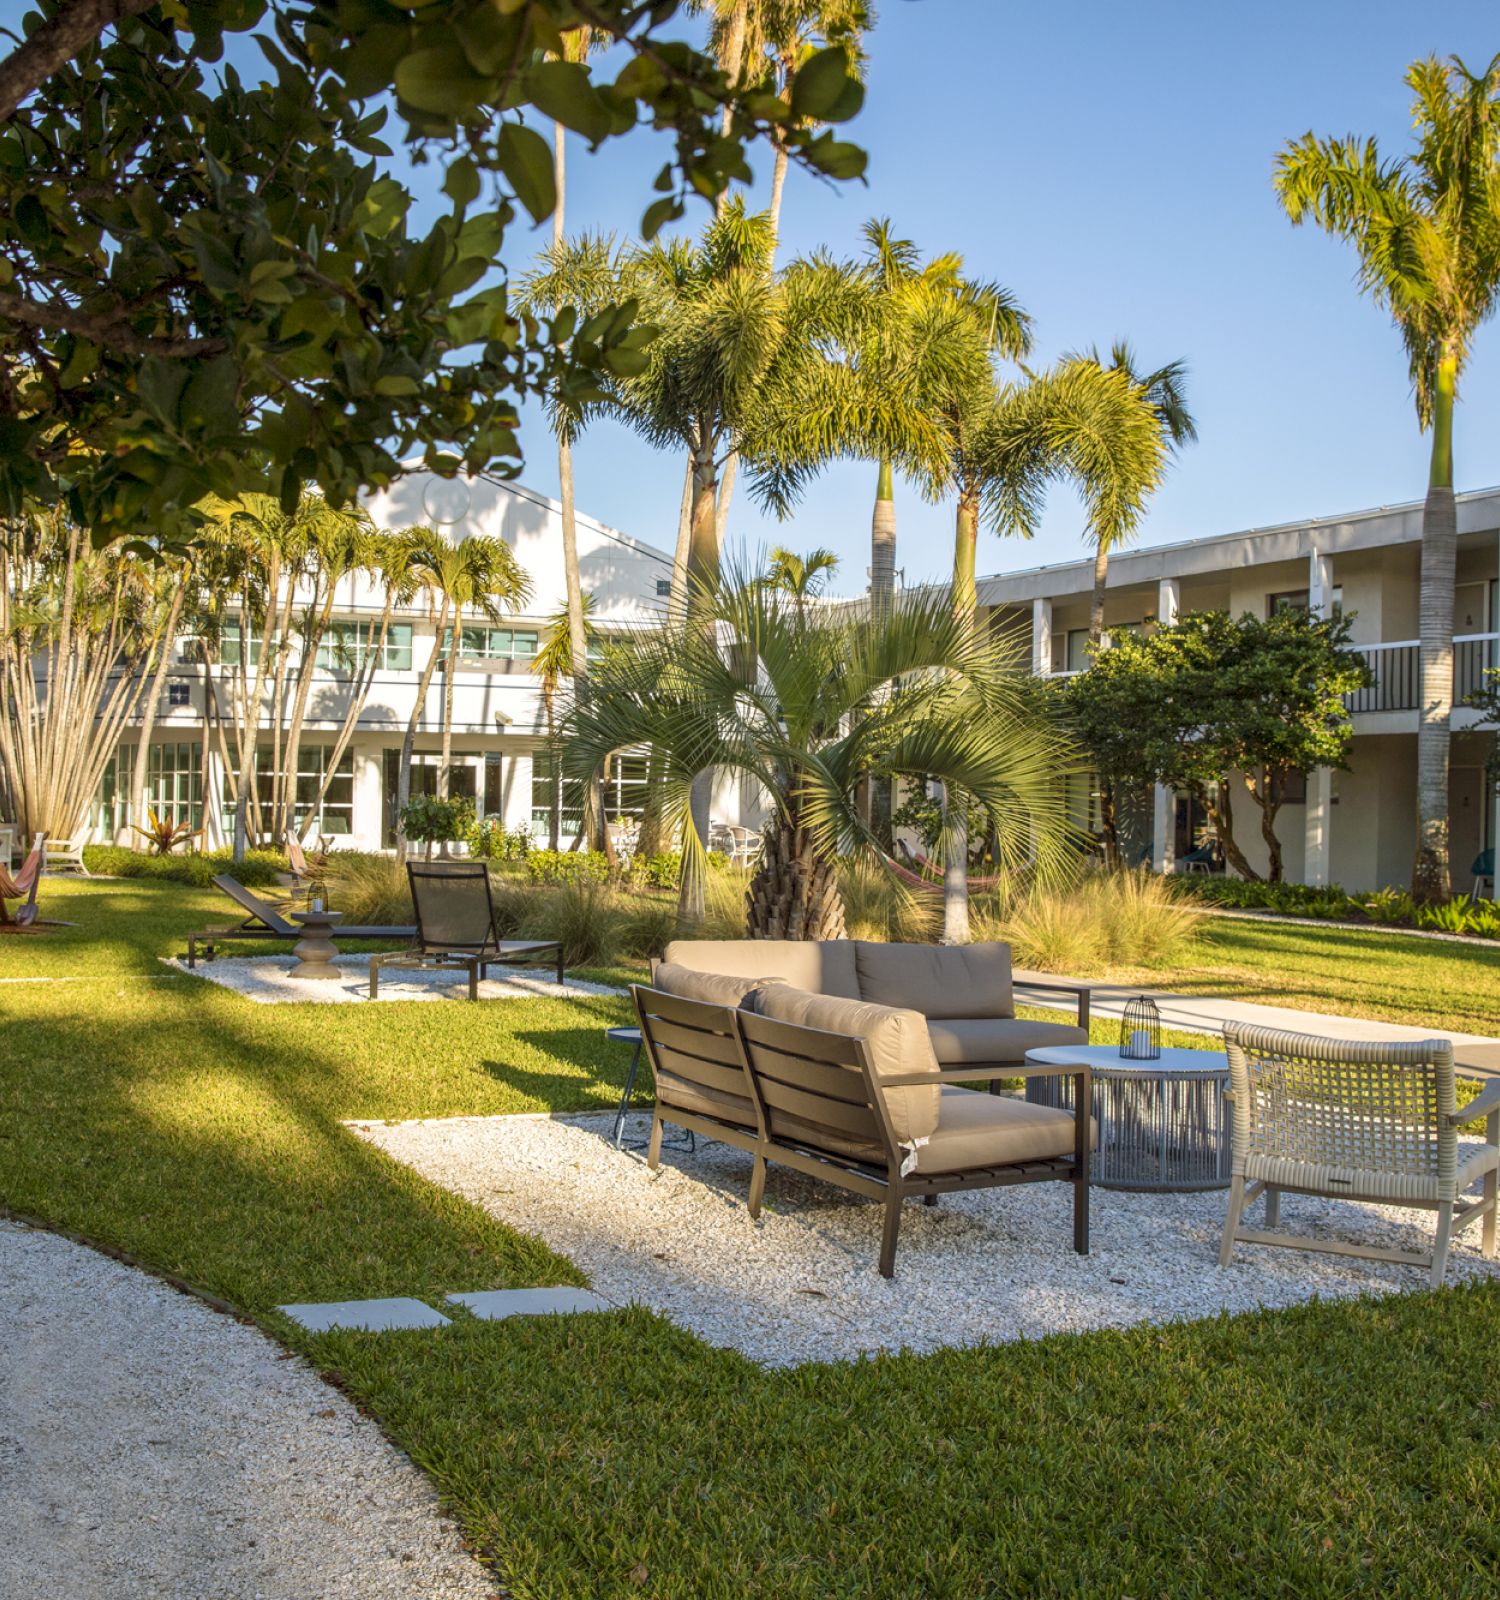 A courtyard with seating areas, palm trees, and a winding pathway in a landscaped garden outside a building.